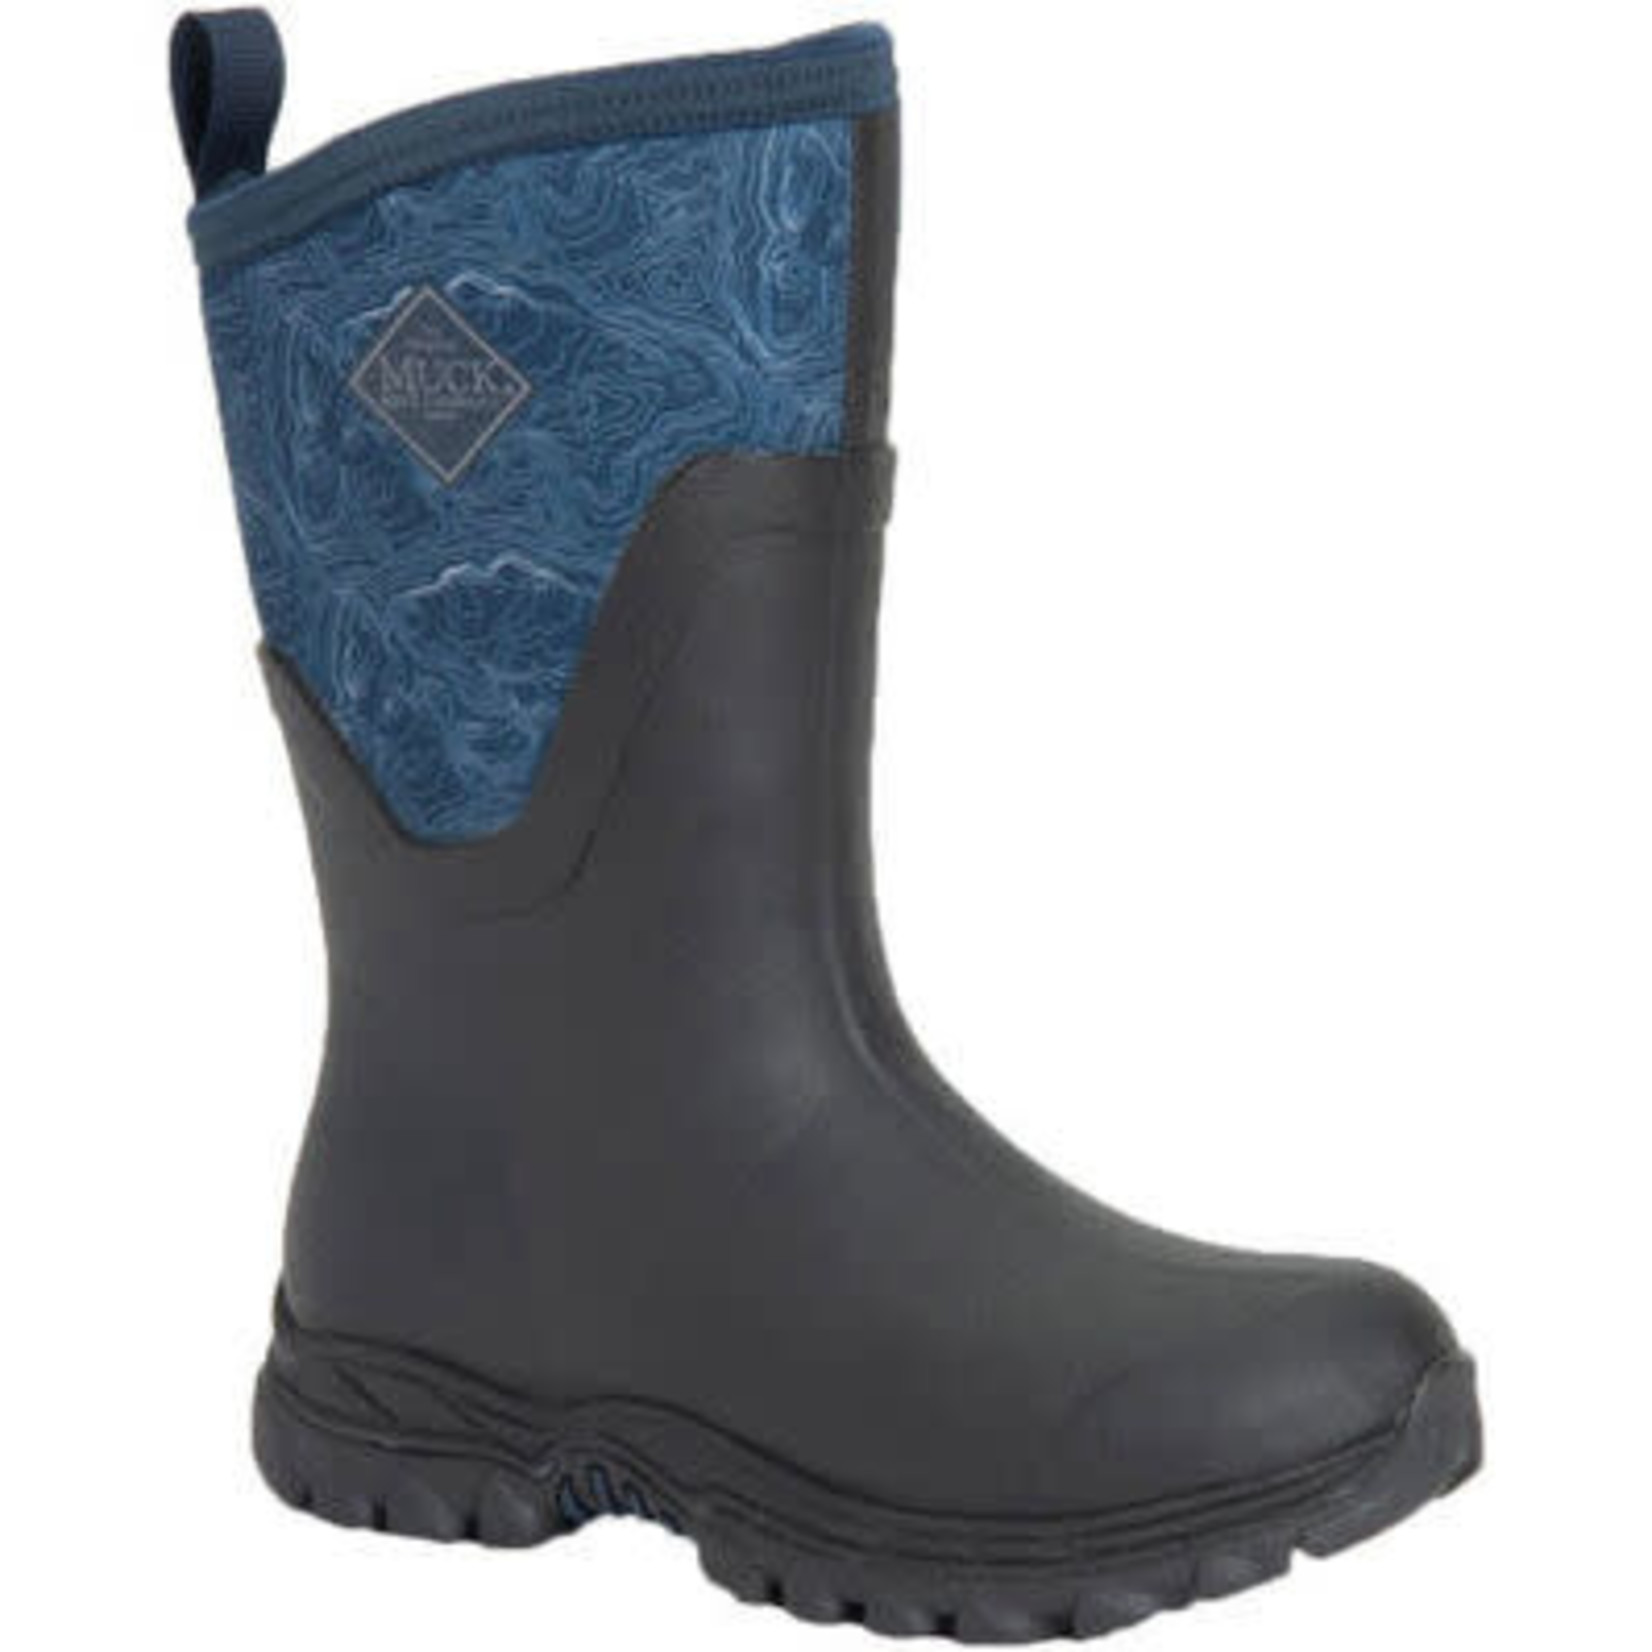 The Original MUCK Boot Company Women's Arctic Sport II Mid Extreme-Conditions Sport Boot